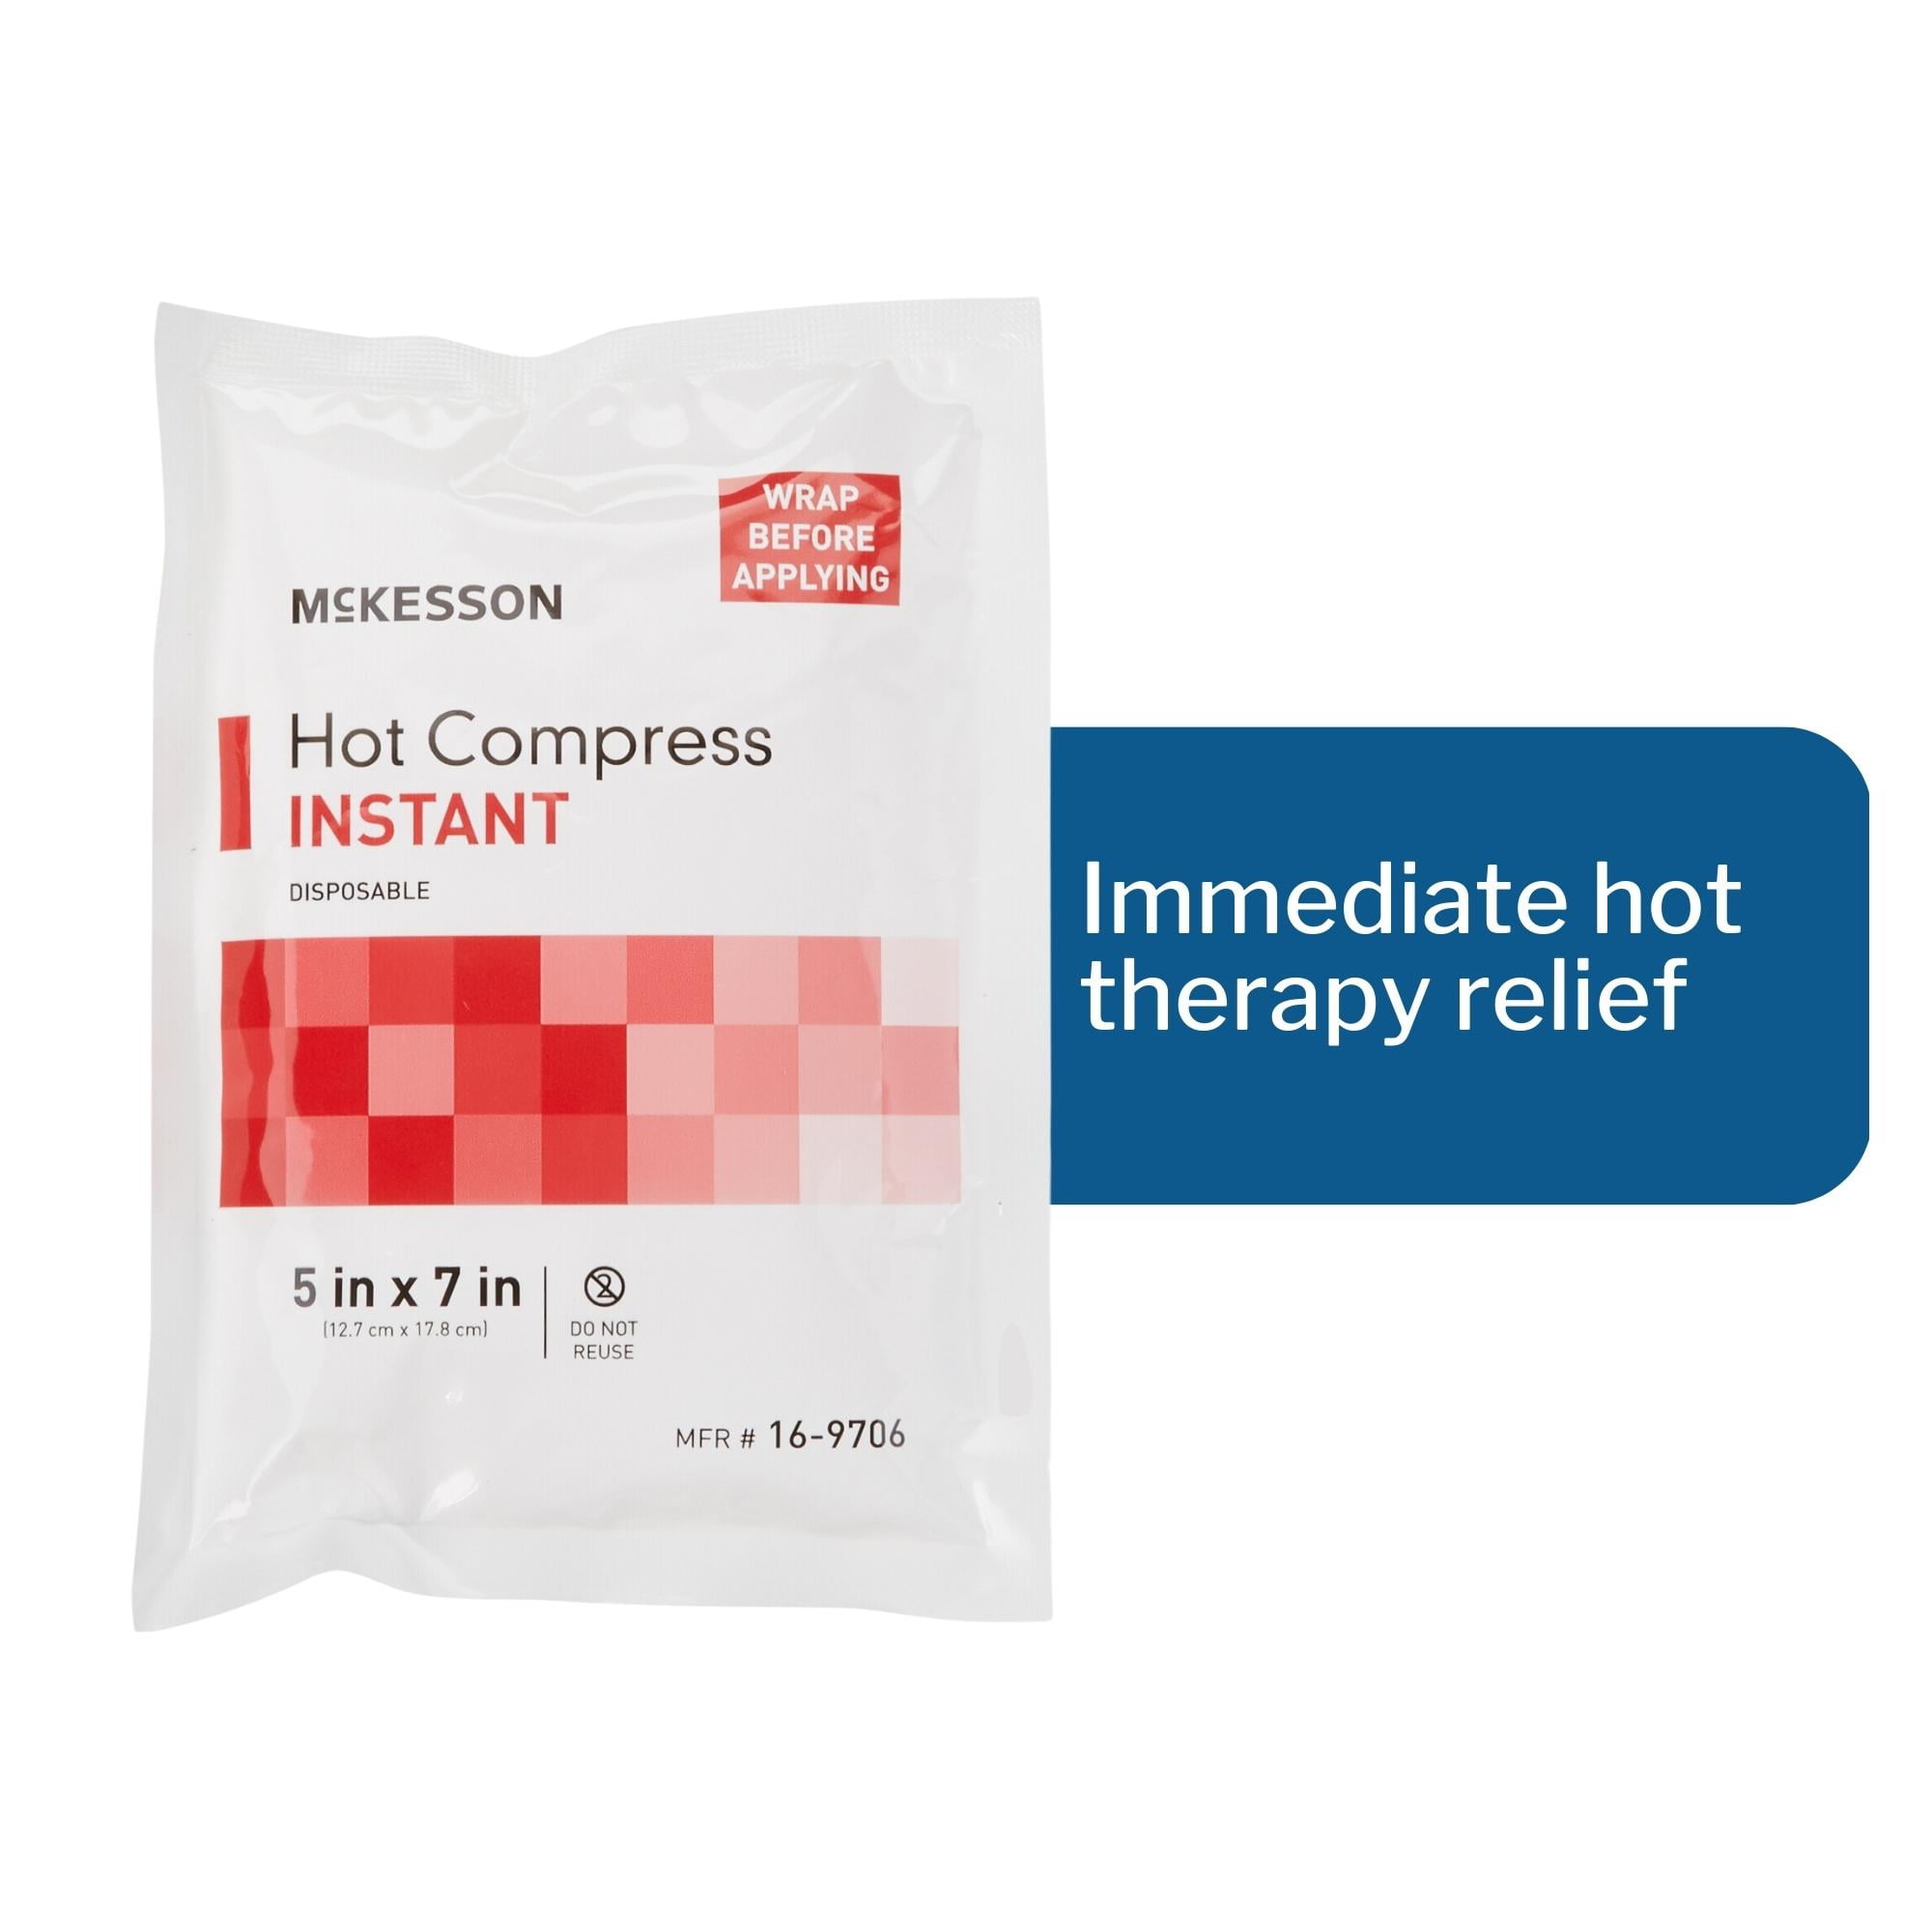 McKesson Hot Compress for Pain and Swelling, Instant Hot Pack, 5 in x 7 in, 1 24 Packs, 24 Total -